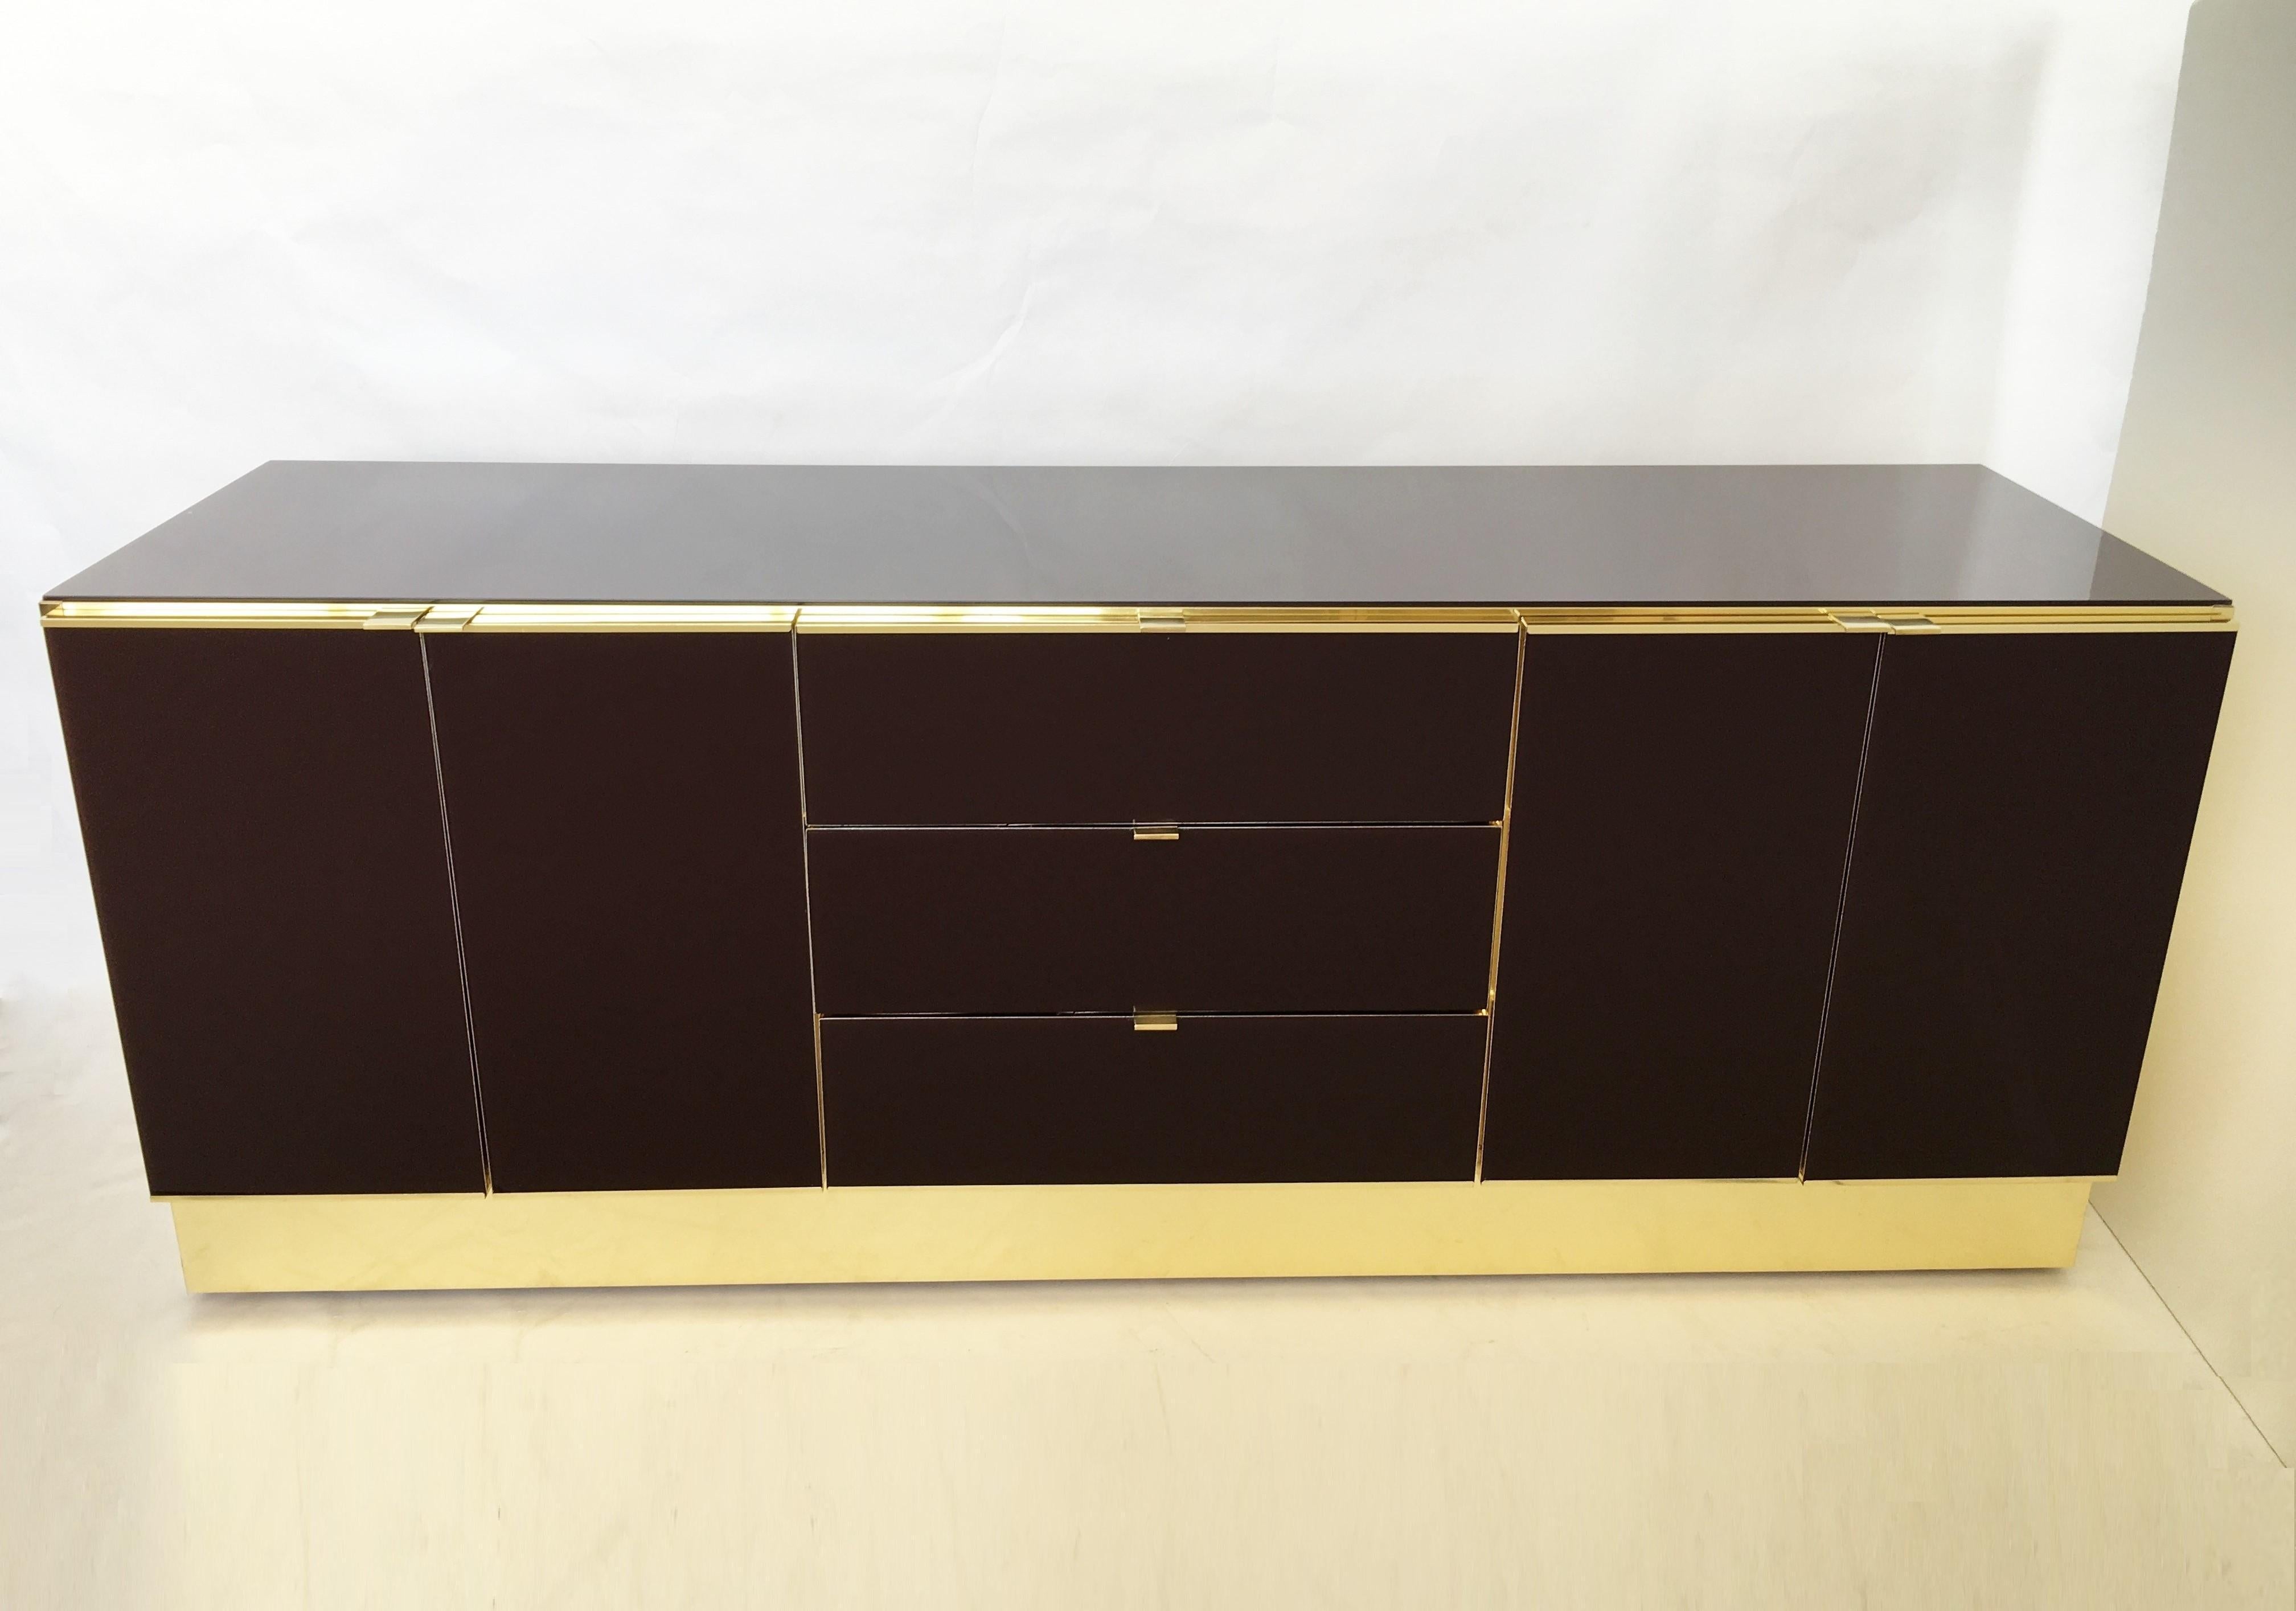 Spectacular Mirrored and Brass Dresser/Credenza by Ello Furniture In Good Condition For Sale In Dallas, TX